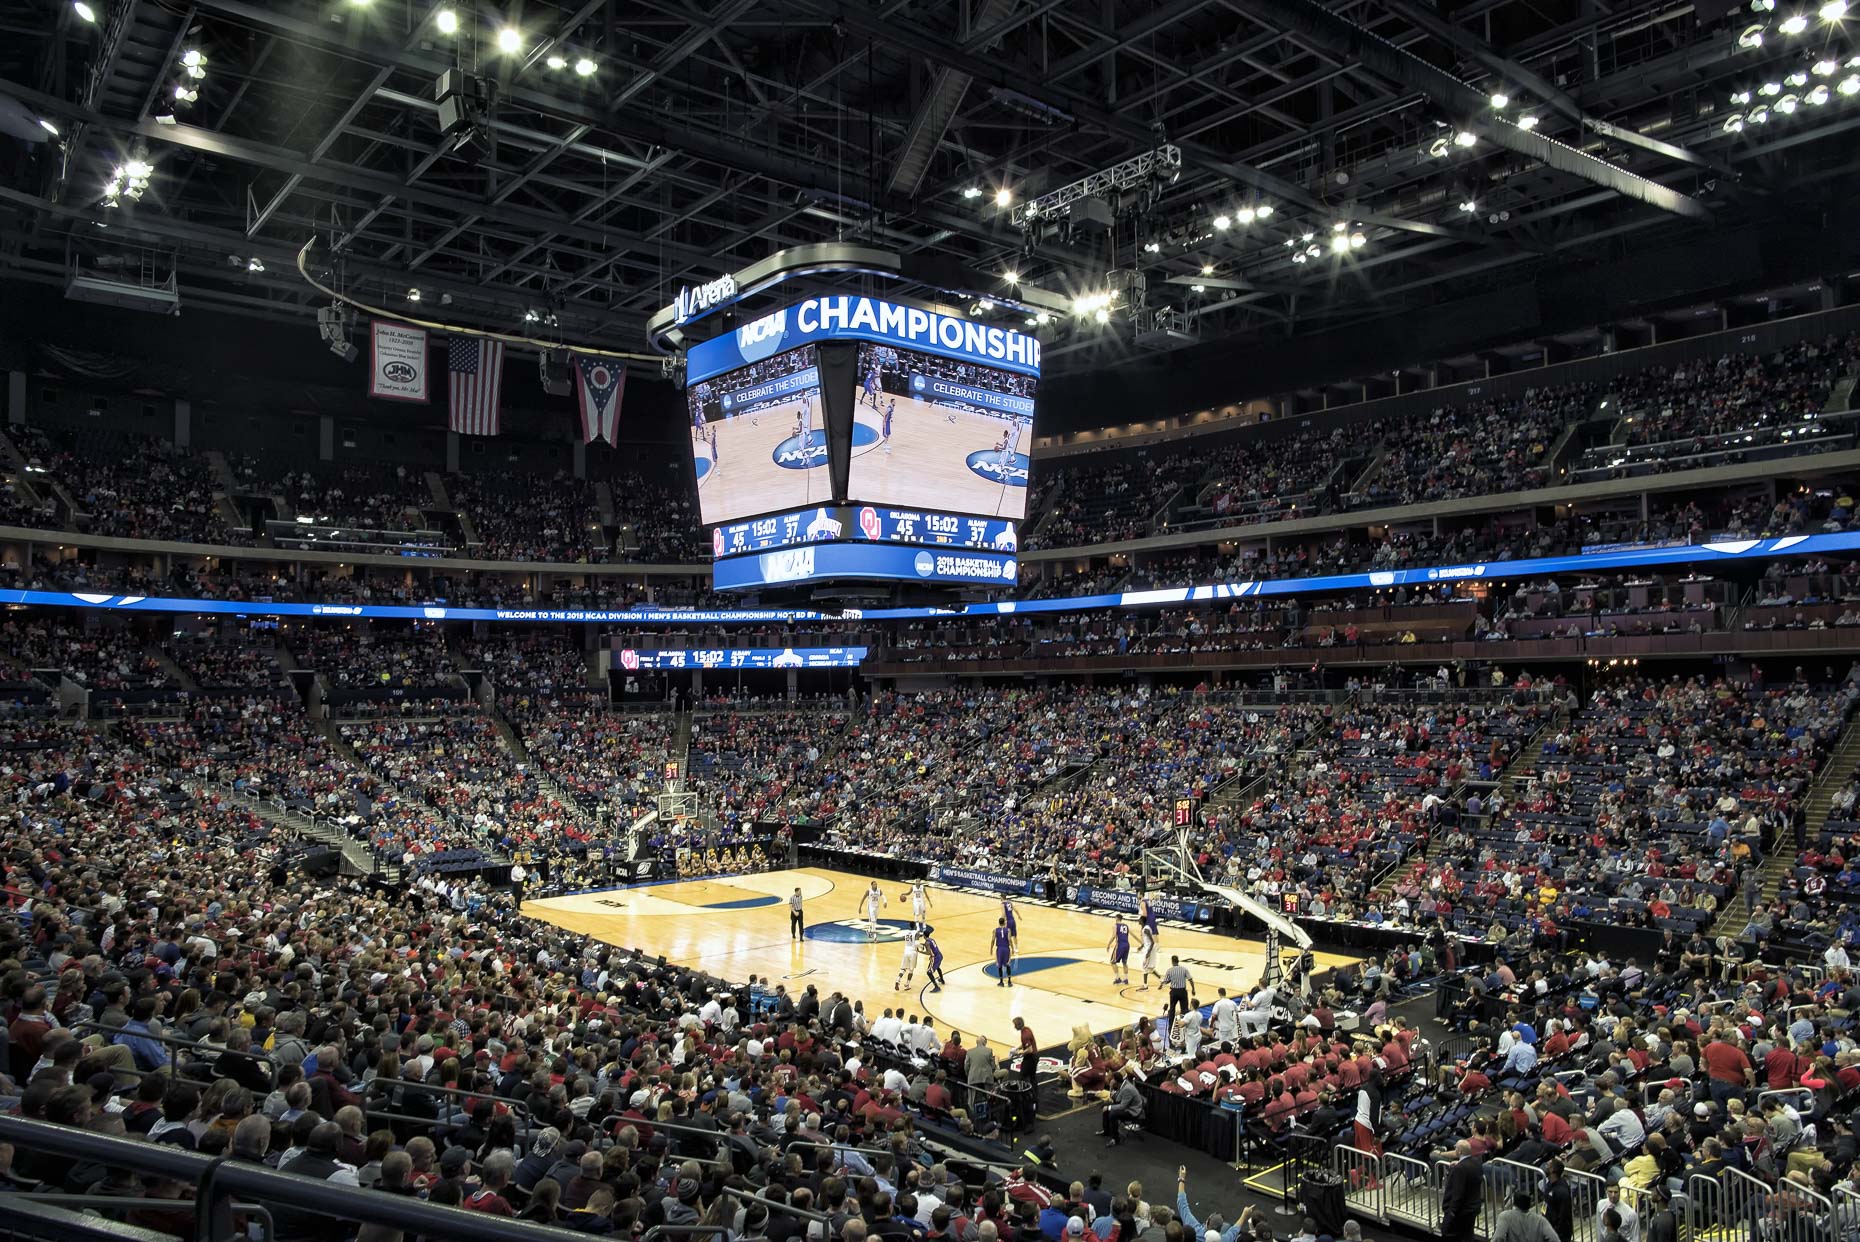 Nationwide Arena by HOK photographed by Lauren K Davis based in Columbus, Ohio